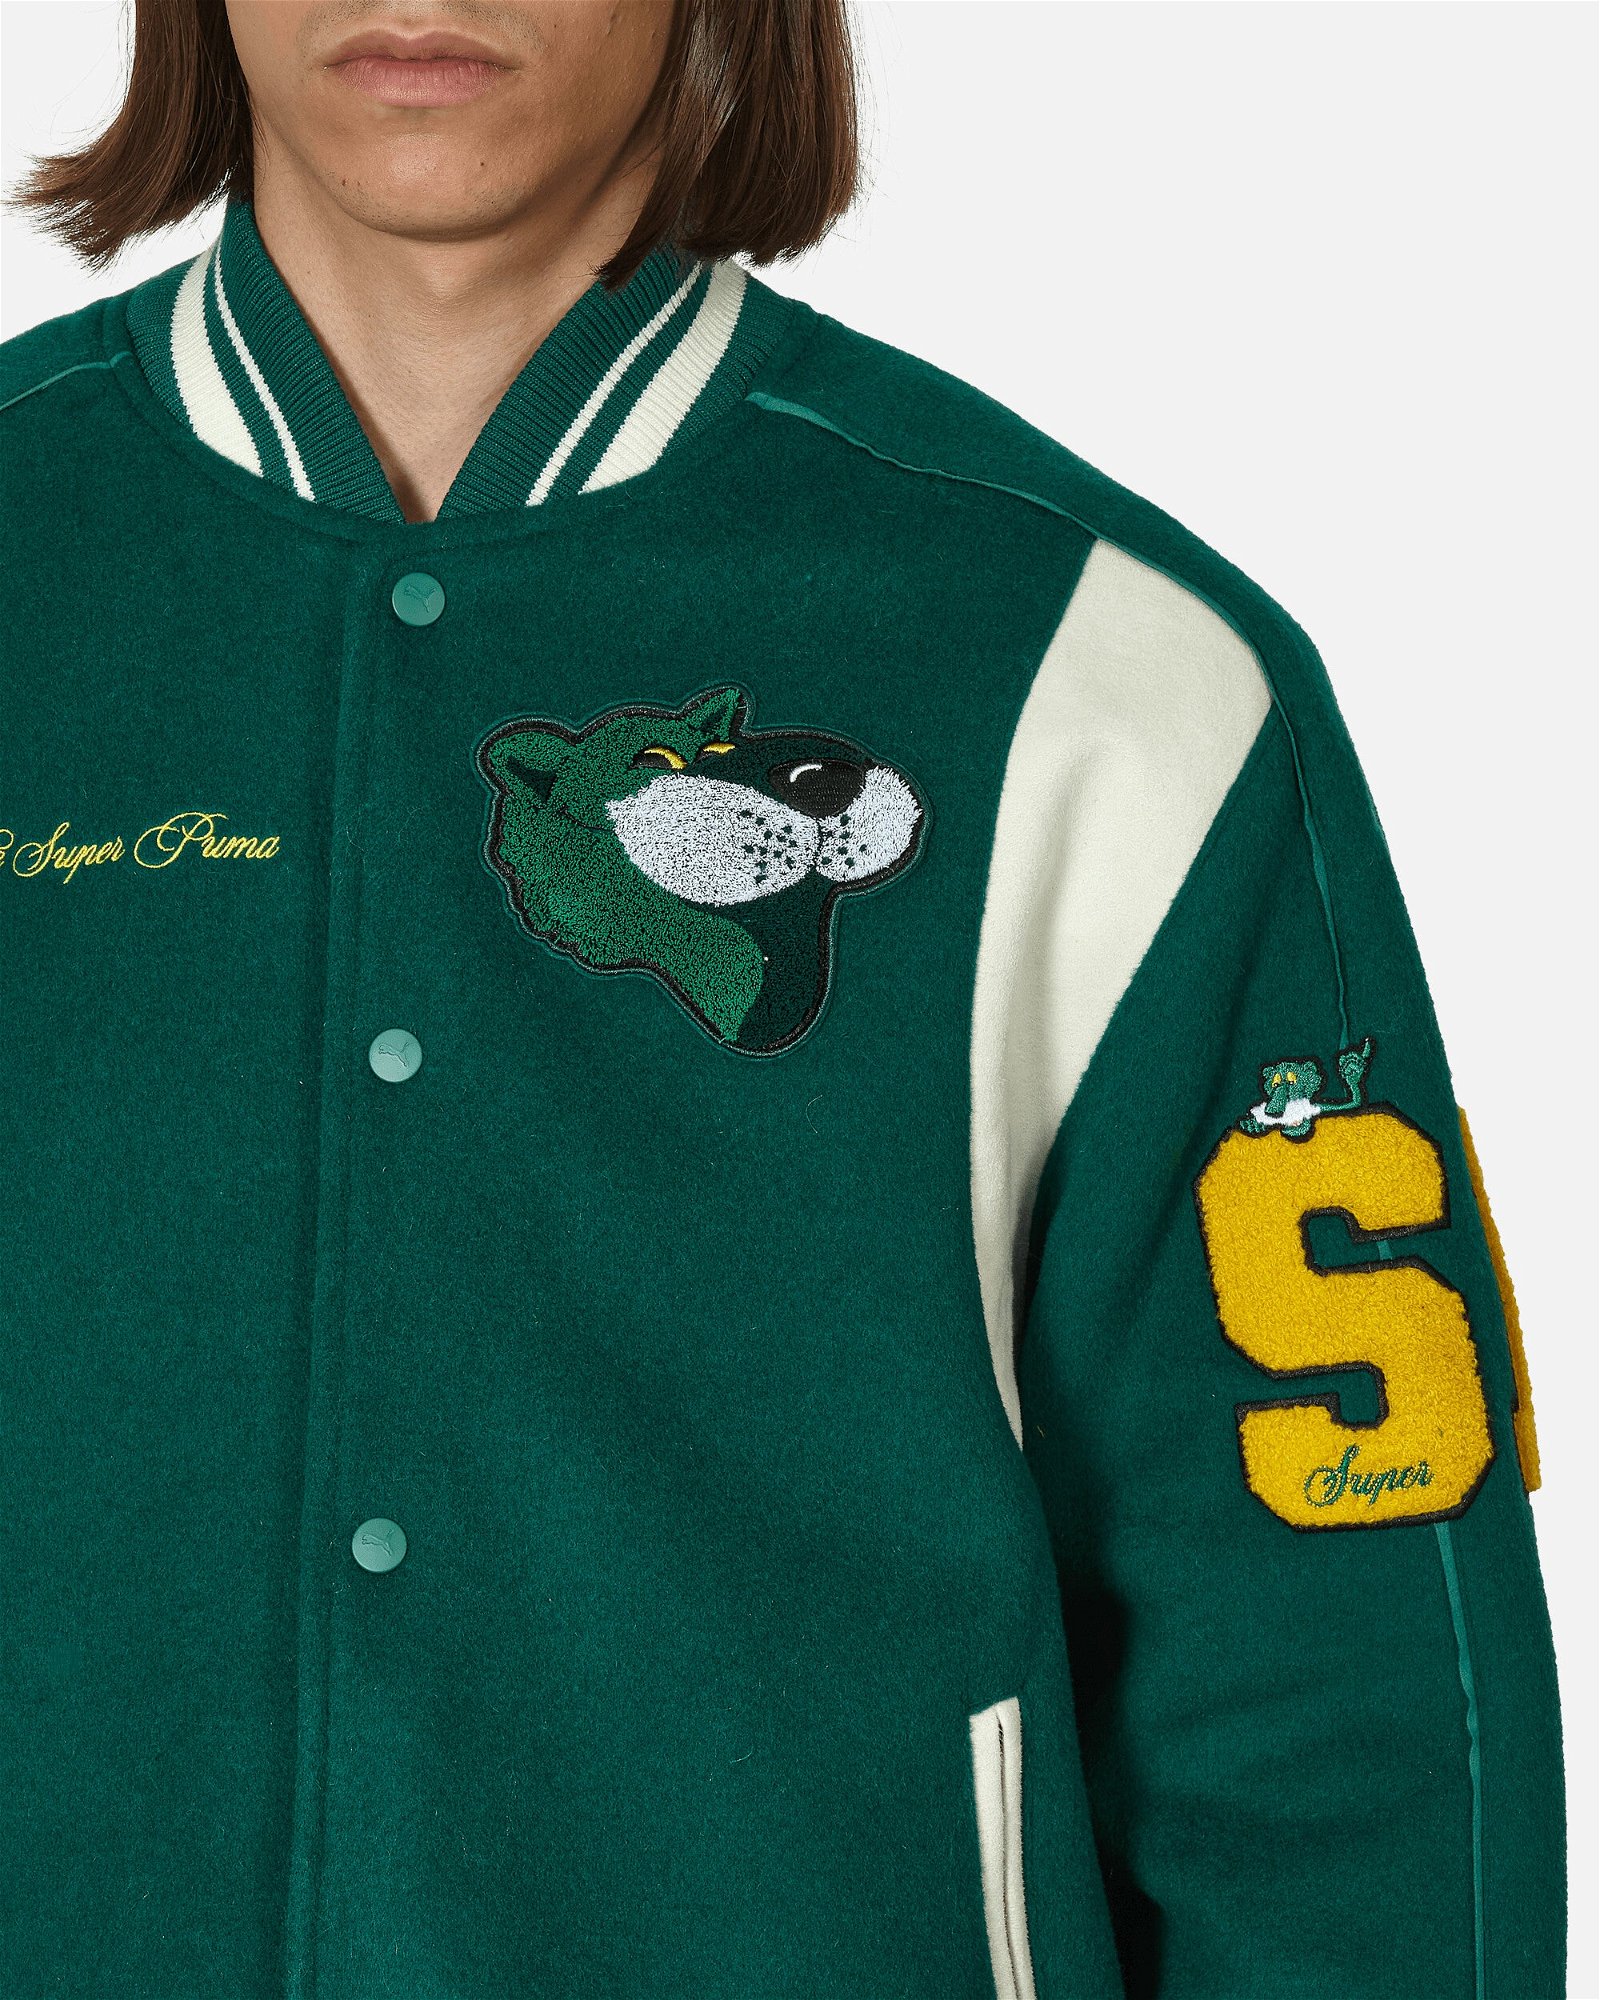 The Mascot T7 College Jacket